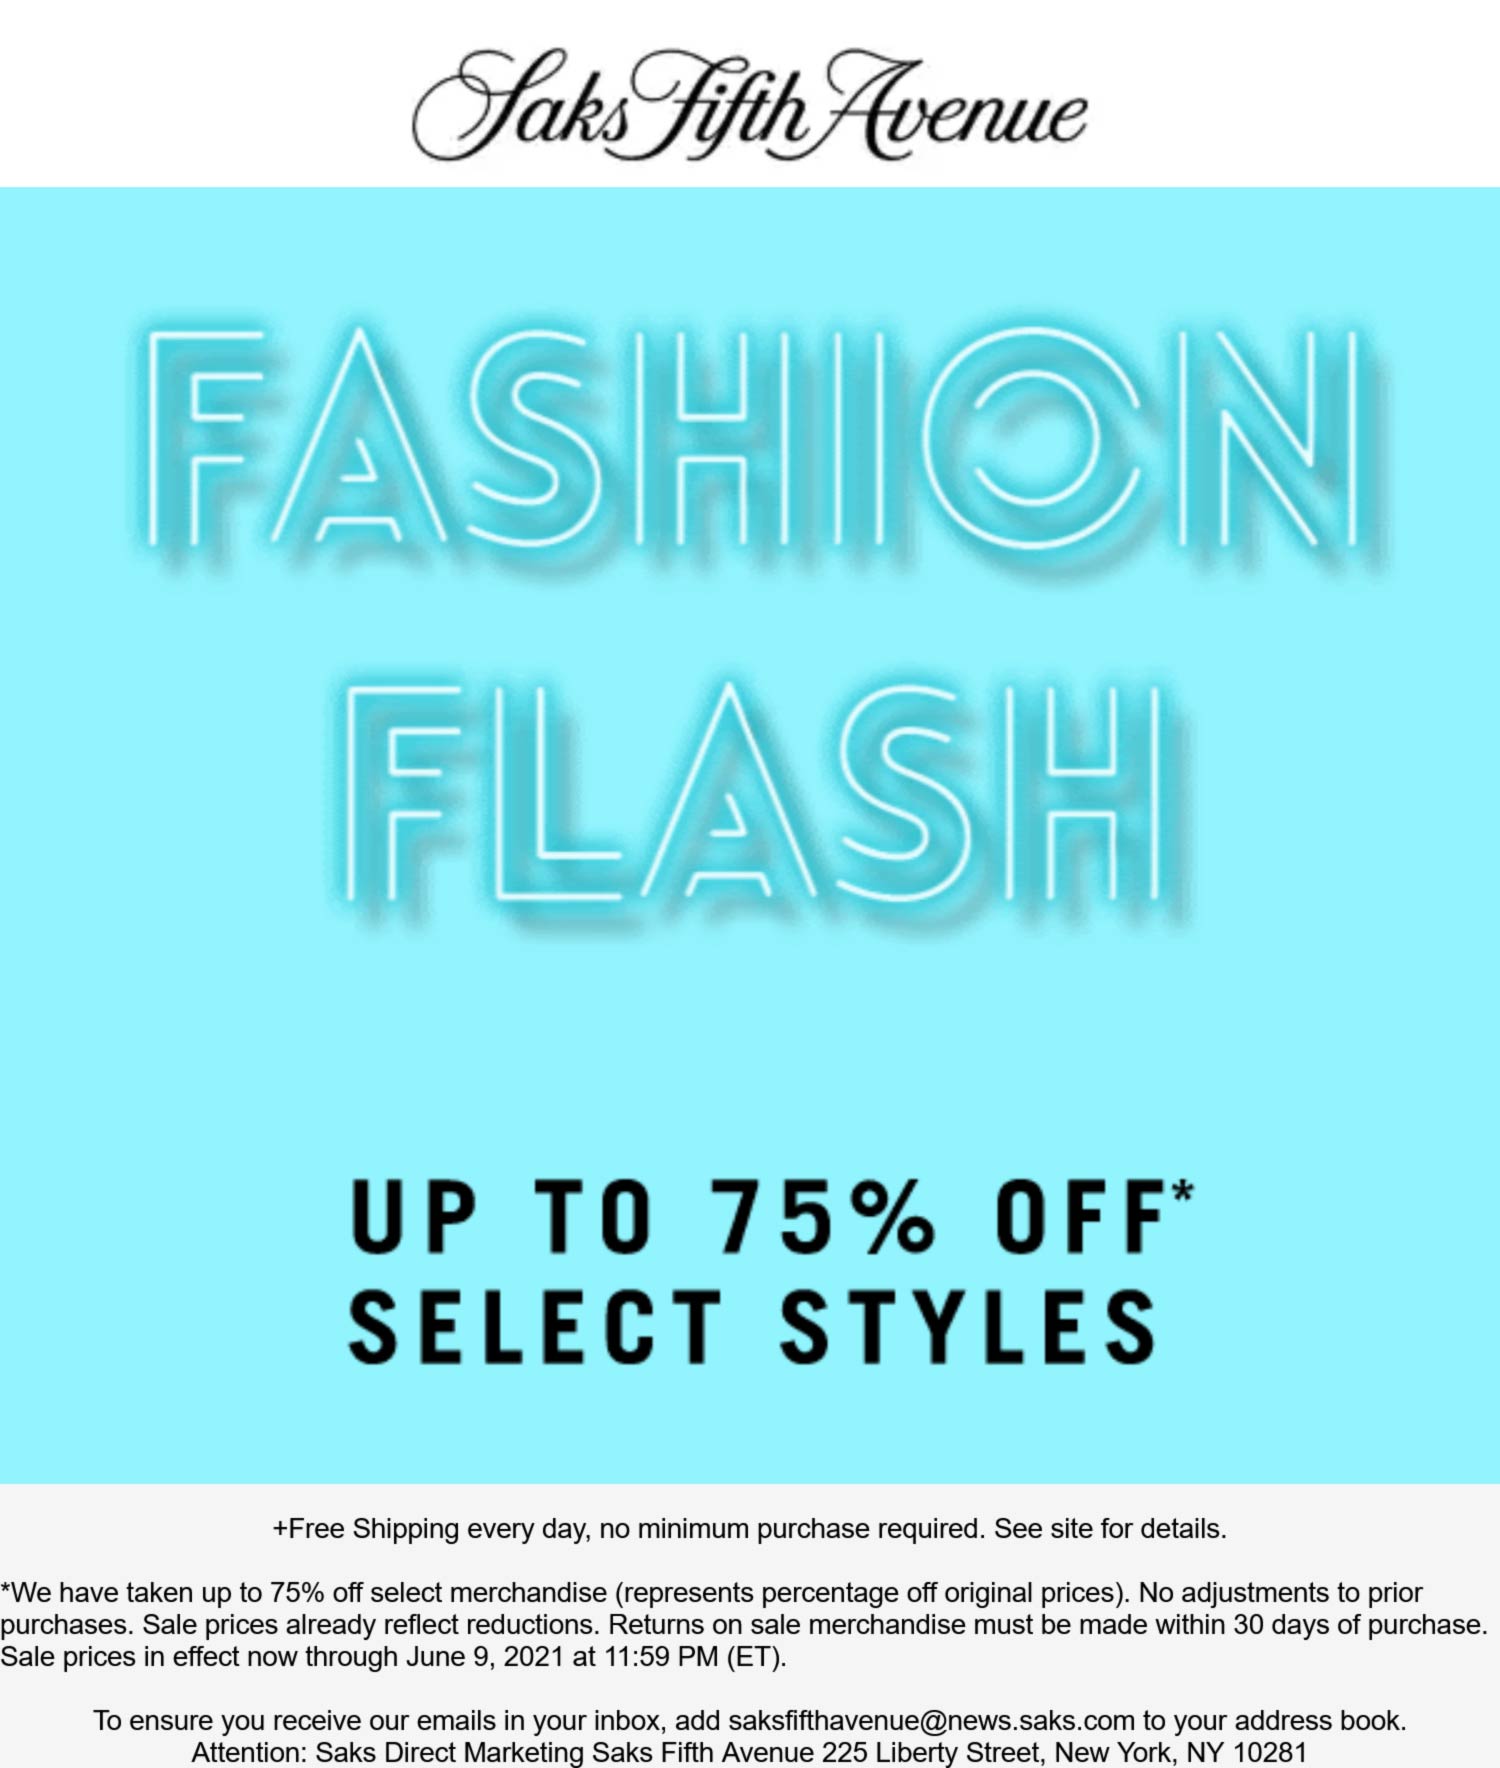 Saks Fifth Avenue stores Coupon  75% off various styles online at Saks Fifth Avenue #saksfifthavenue 